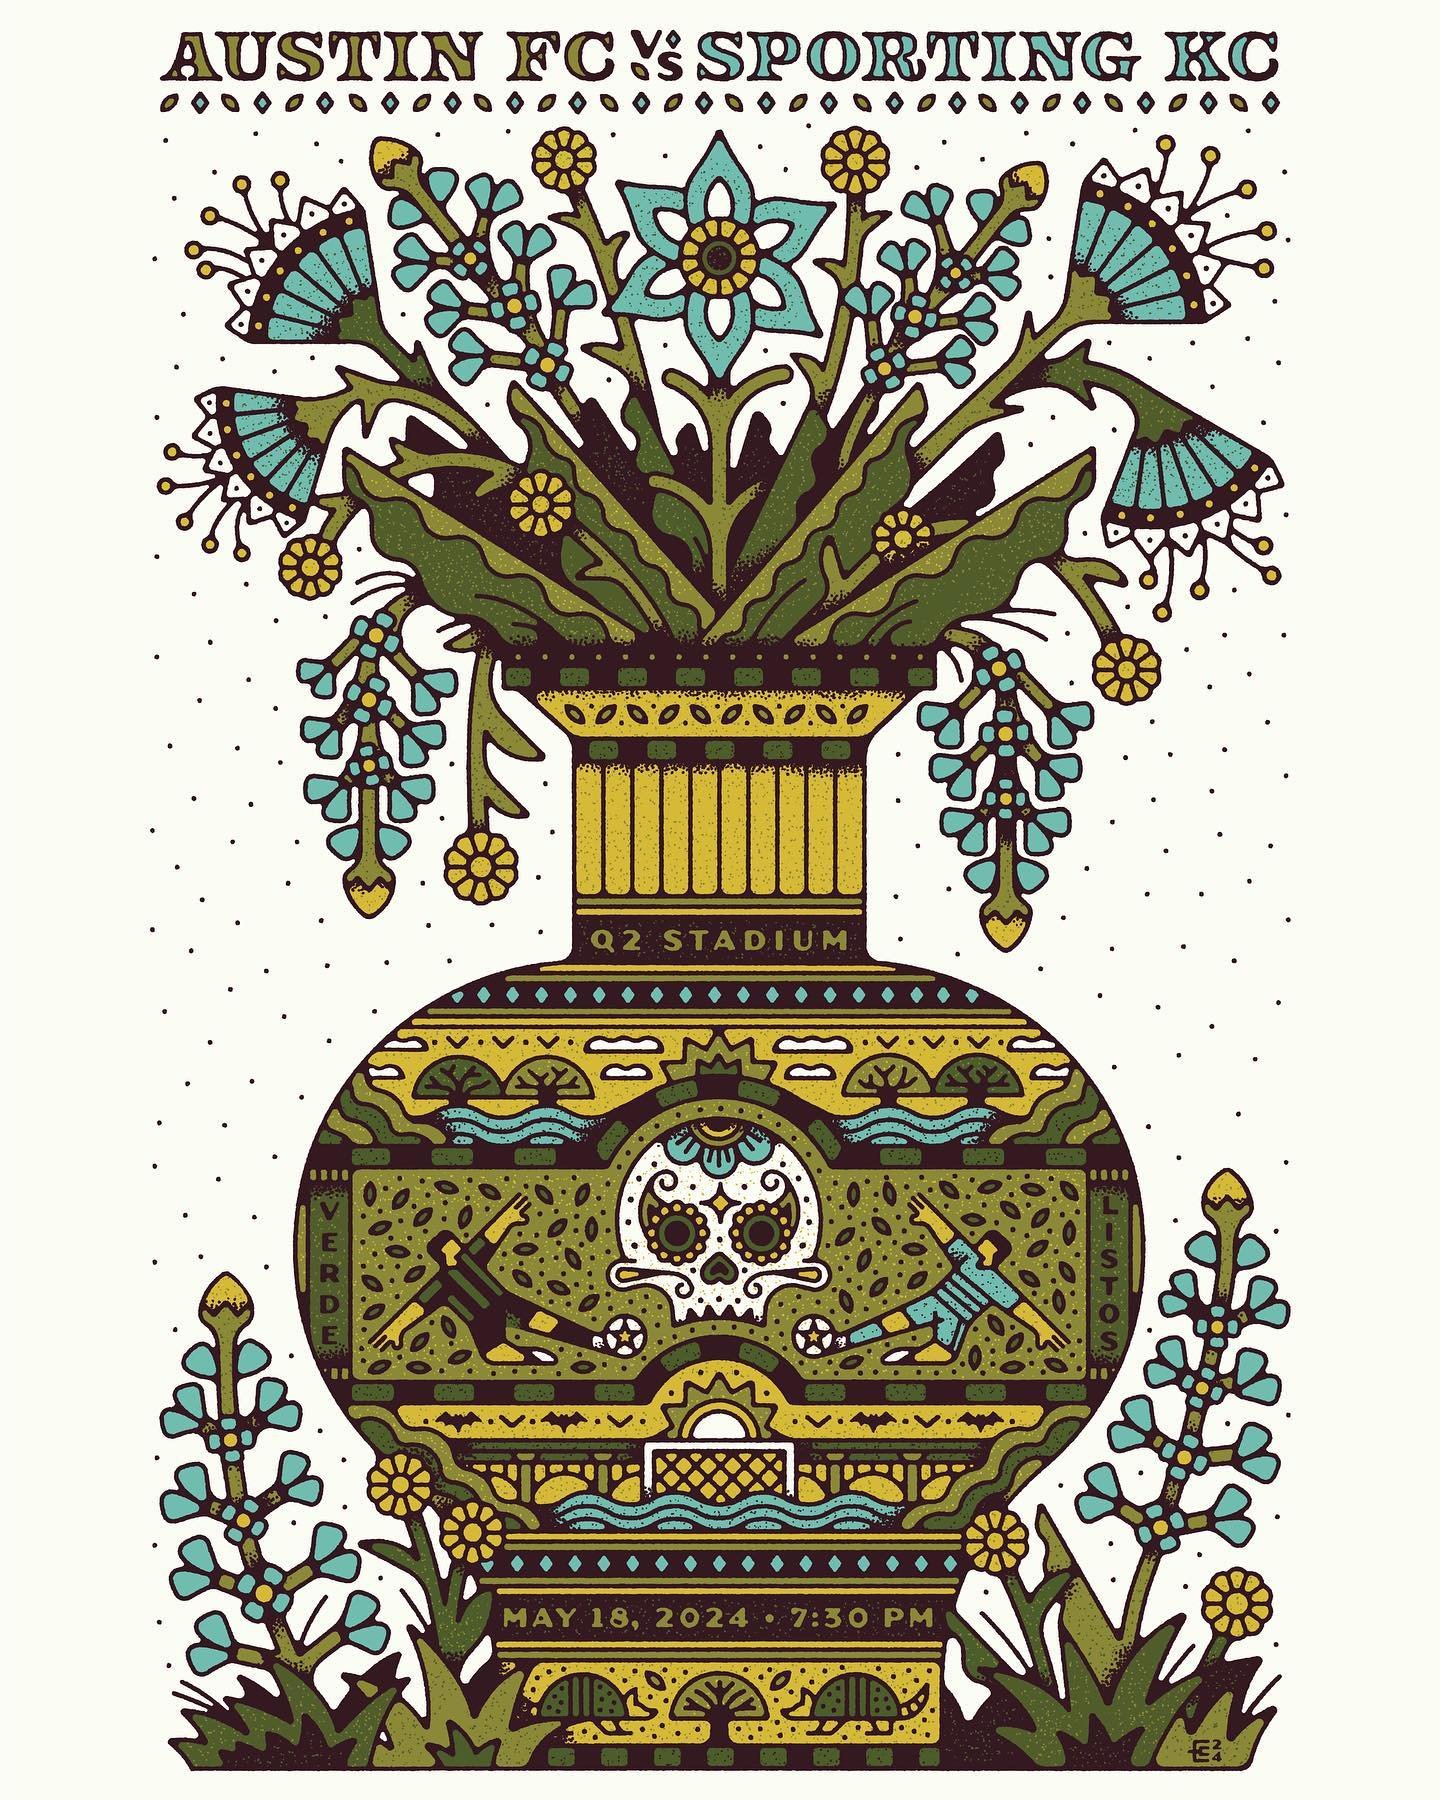 details from my next @austinfc match day poster 💚 my latest obsession has been the great pottery throwdown so I was inspired to make a vase, filled with little details like the Congress bridge and bloomin bluebonnets, and representing KC&rsquo;s sig